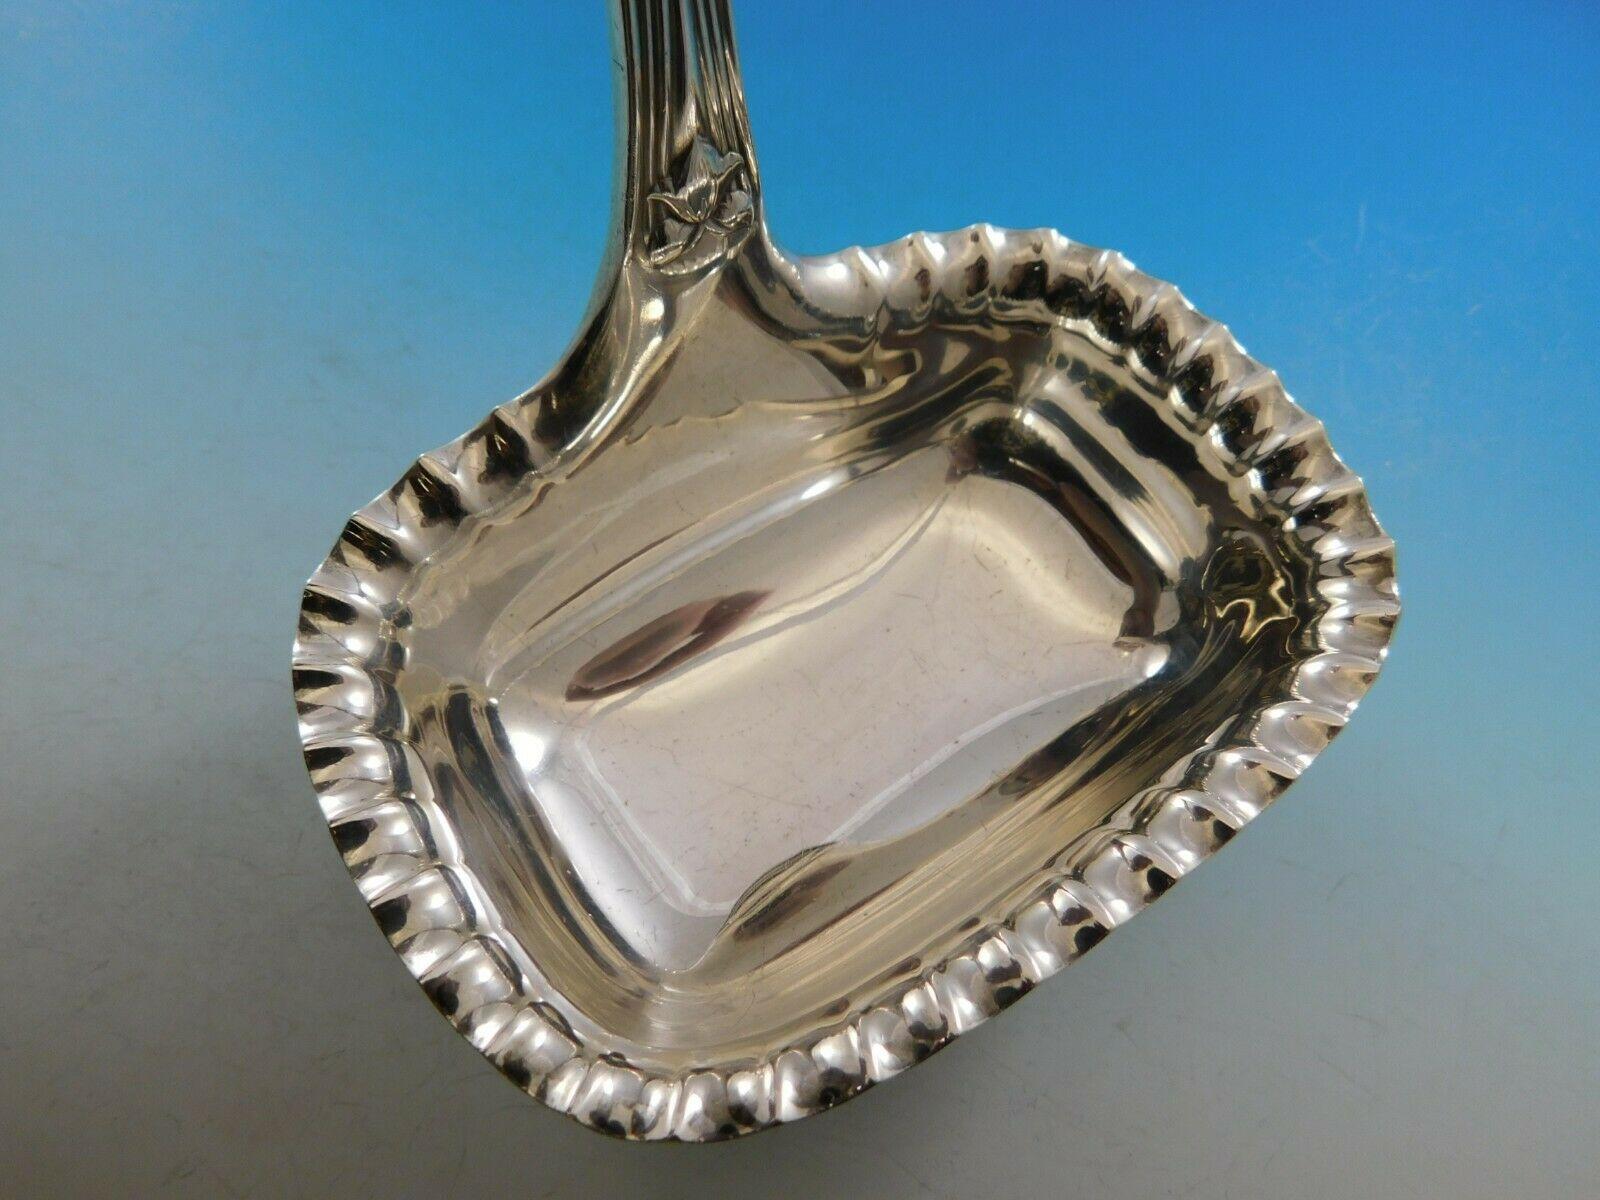 Japanese was designed in 1871, during the most innovative period in the history of Tiffany silver, and it is still one of the most popular of all Tiffany patterns. Japanese was the first Tiffany pattern to introduce silver decorated in the Japanese